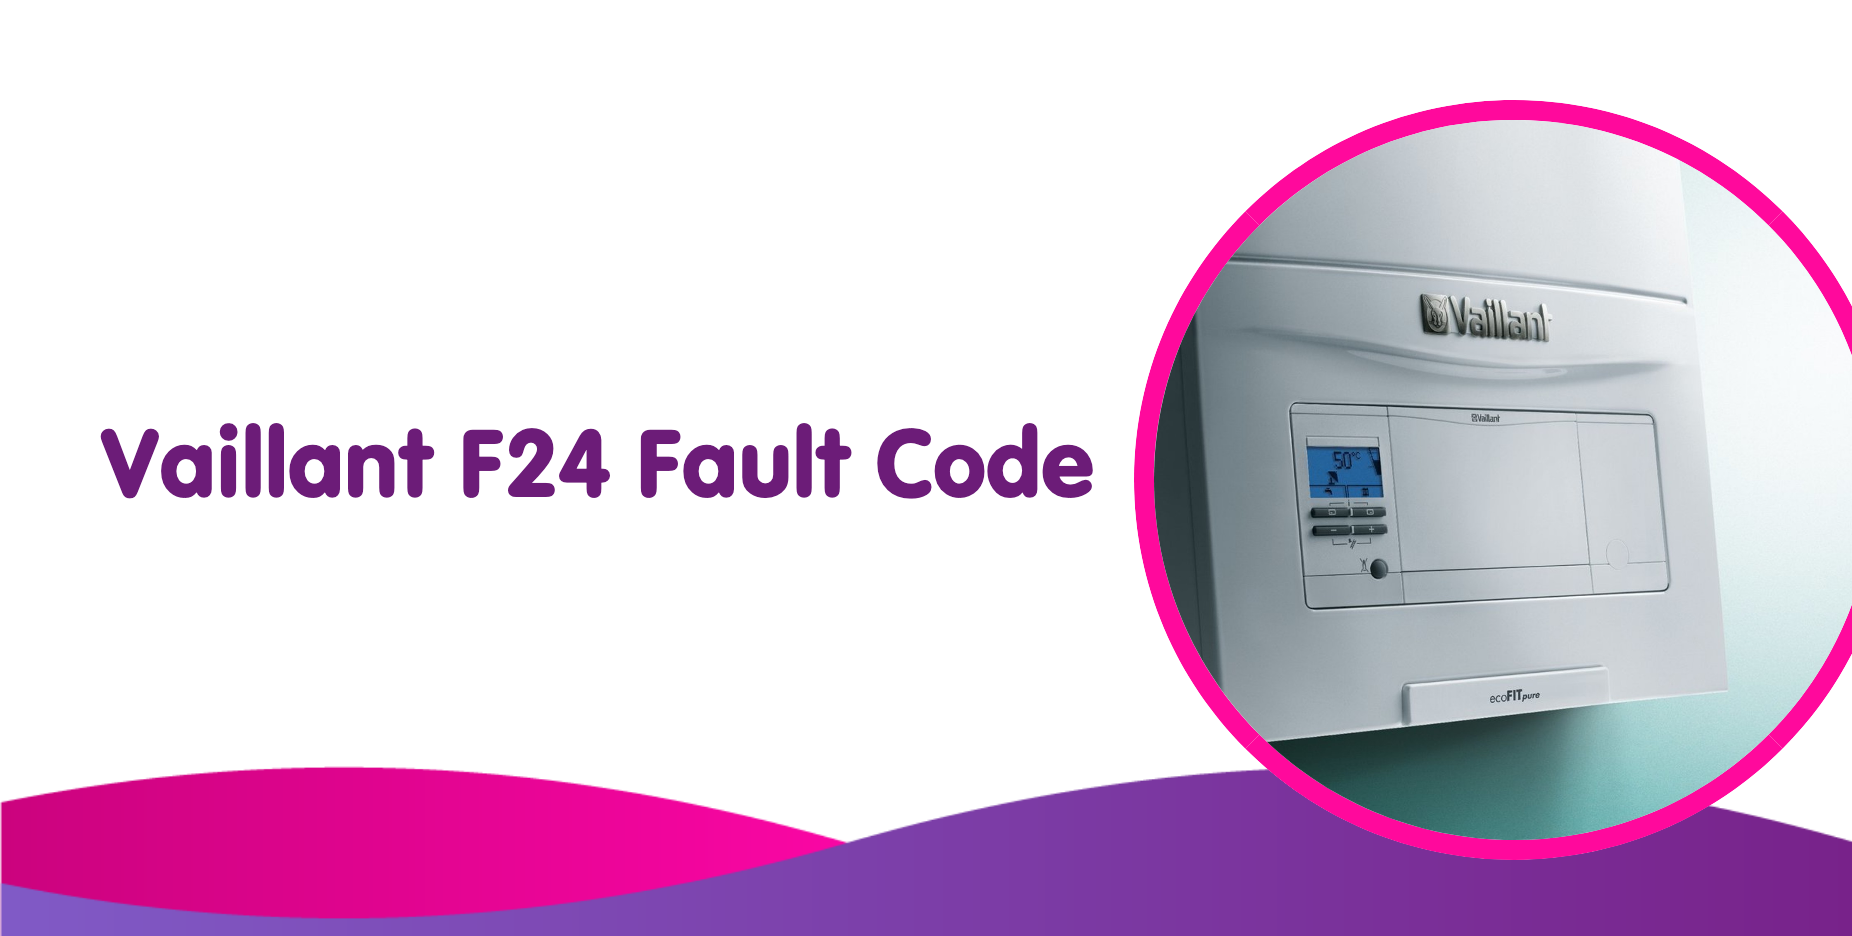 Vaillant F24 Fault Code Meaning, Causes & How To Fix